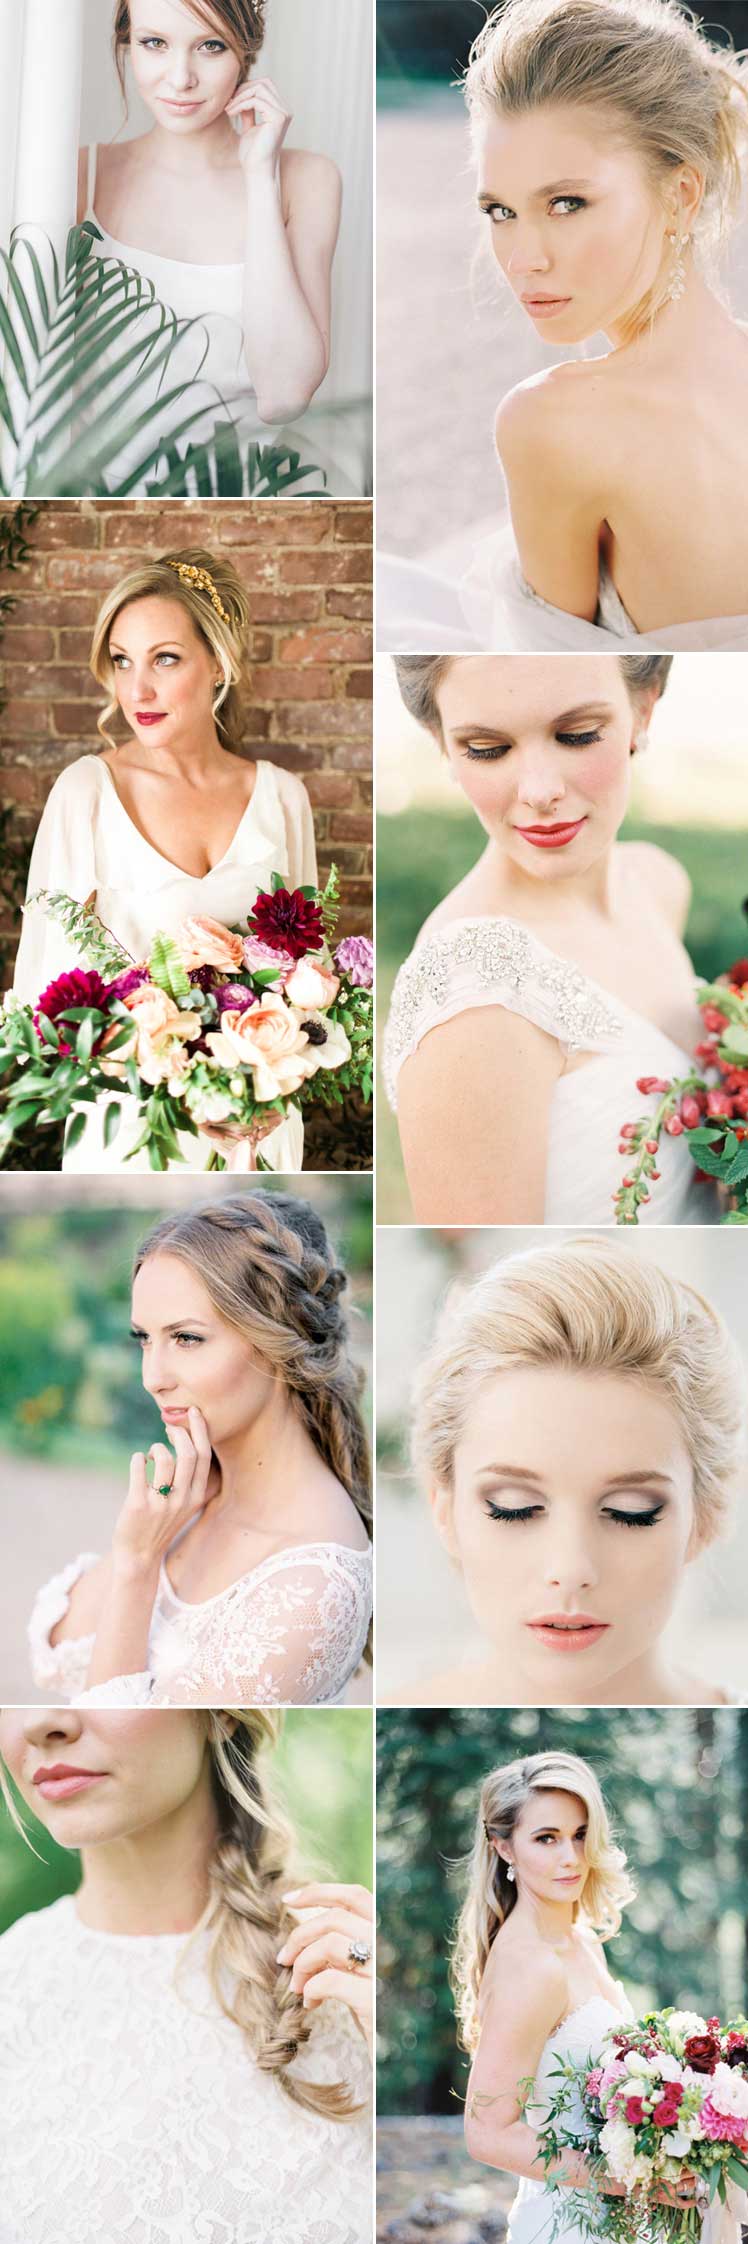 Ideas for your wedding day make-up